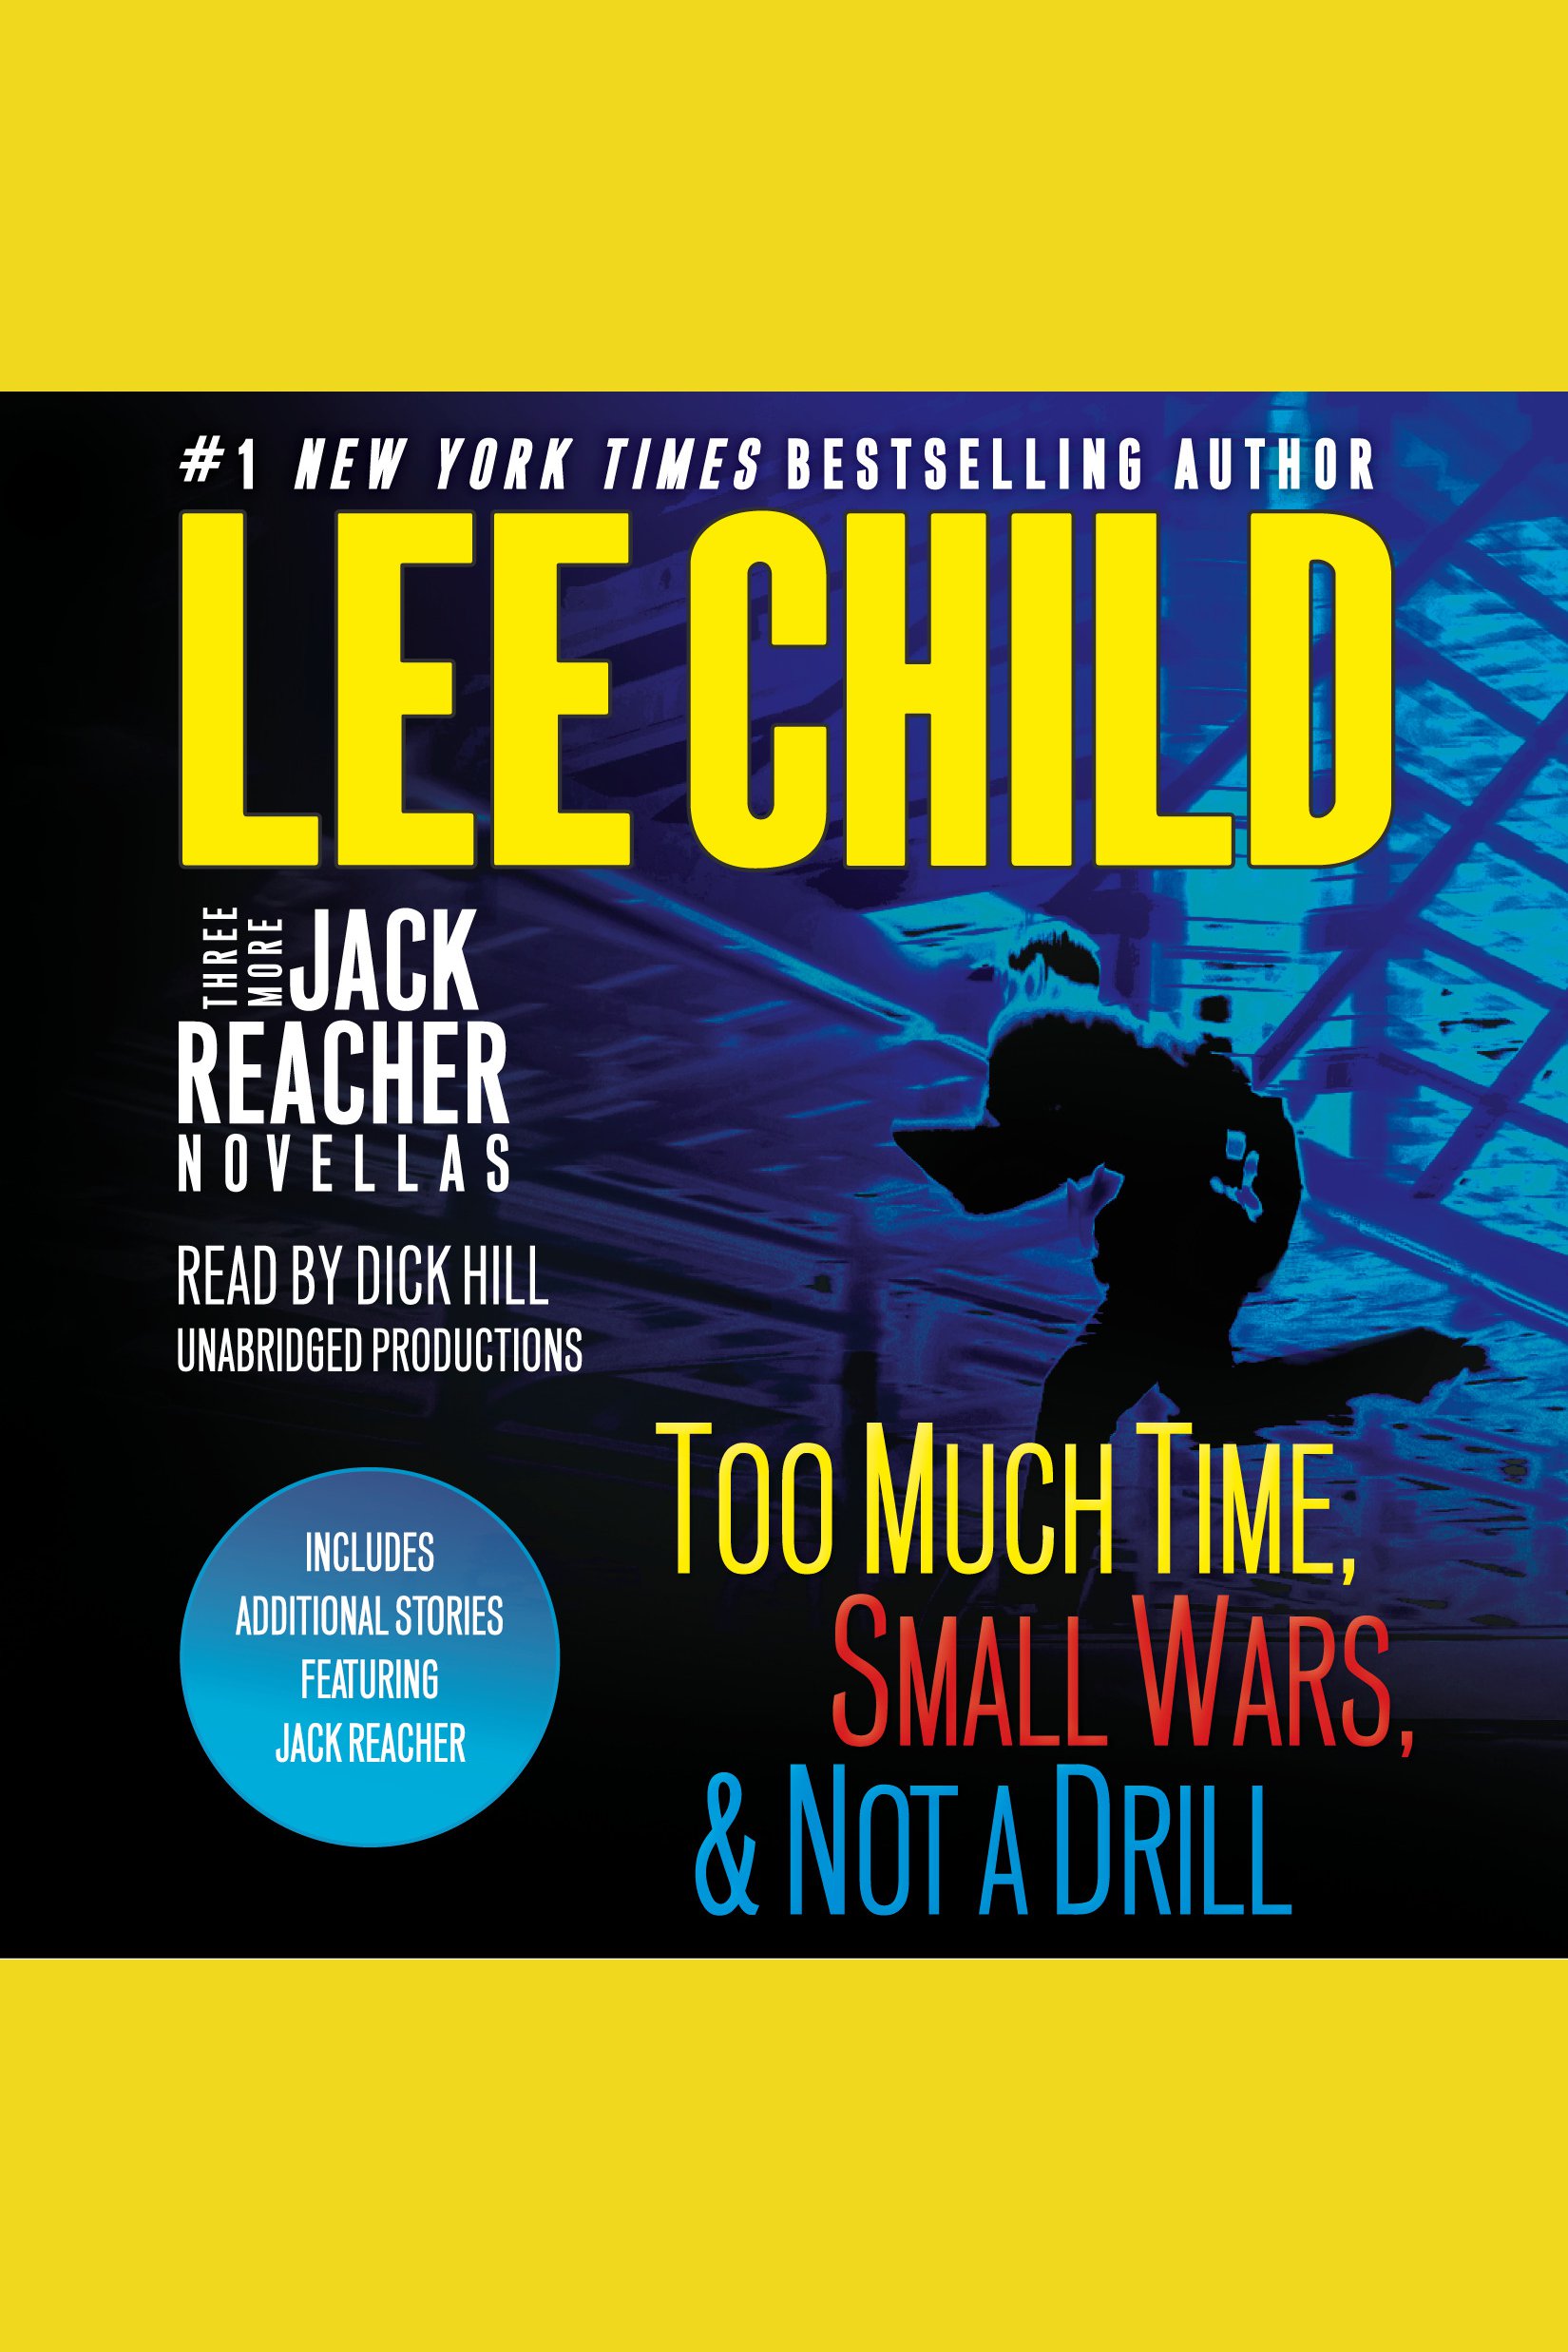 Cover image for Three More Jack Reacher Novellas [electronic resource] : Too Much Time, Small Wars, Not a Drill, Plus Additional Stories